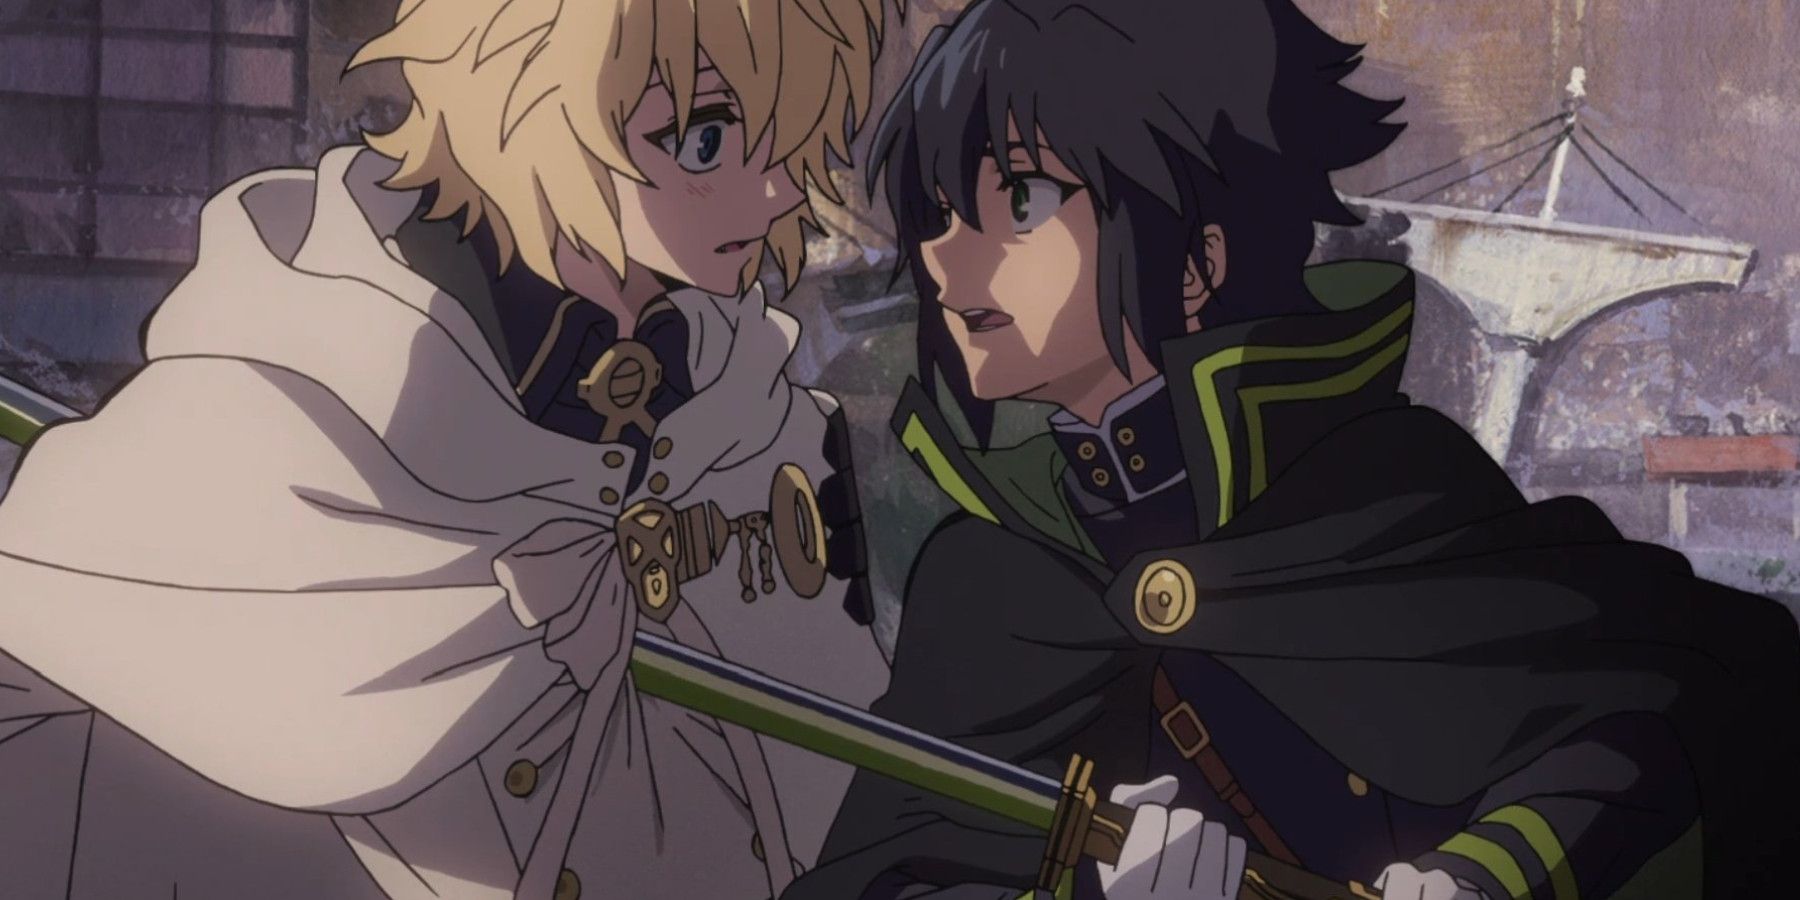 Seraph of the End: An Unfinished Gem From The Creators of Attack